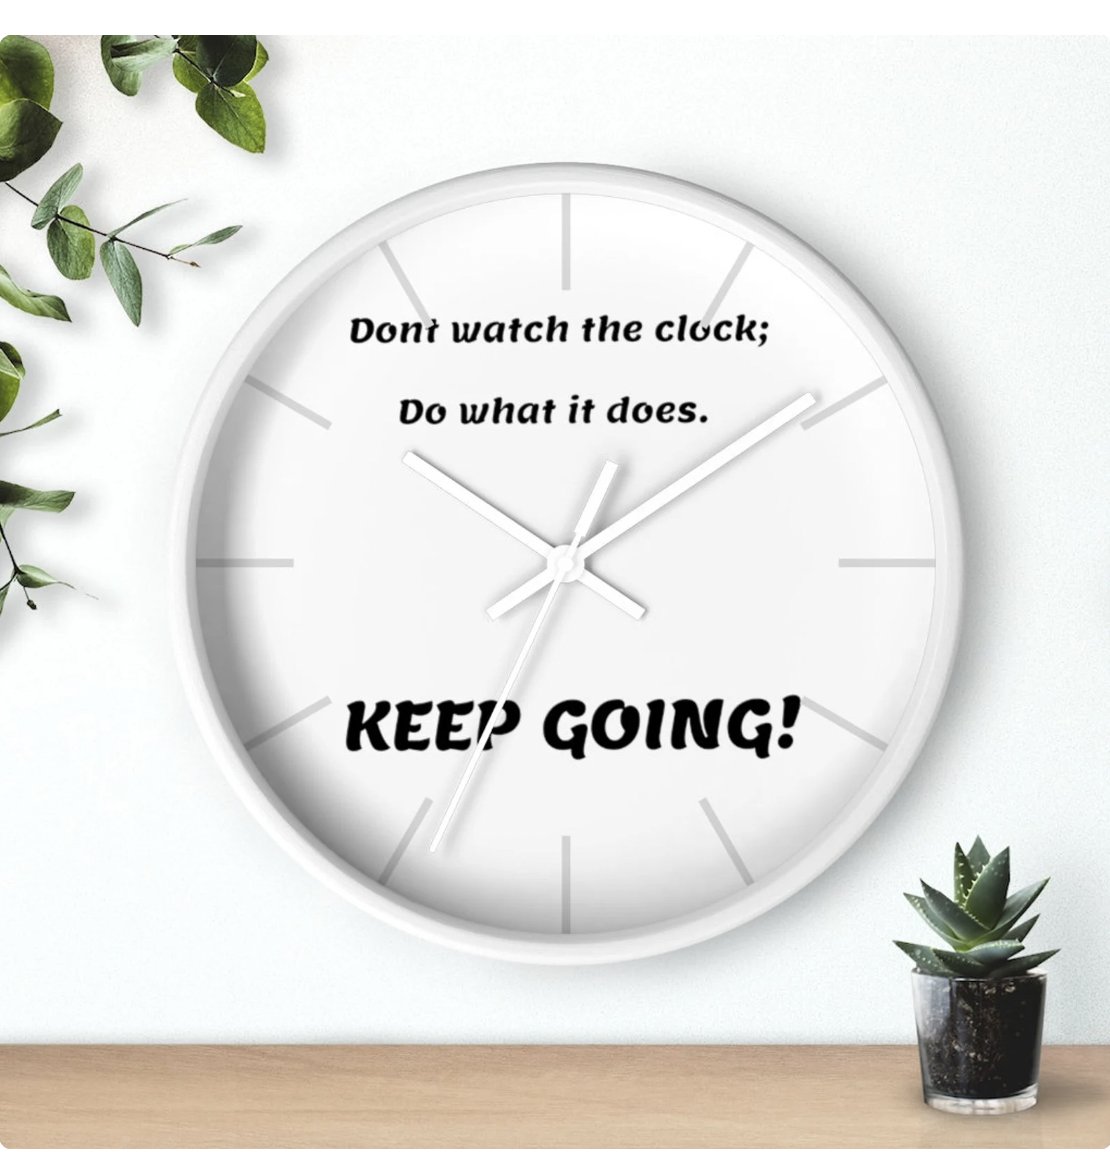 Dont watch the Clock Wall clock, High Quality Wall Clock, White Or Wooden Frame, Statement Piece, Choice of Colors #JnJGiftsnCrafts #giftsforalloccasions #highqualitywallclock #whiteorwoodenframe #statementpiece  bit.ly/3Wiwndu